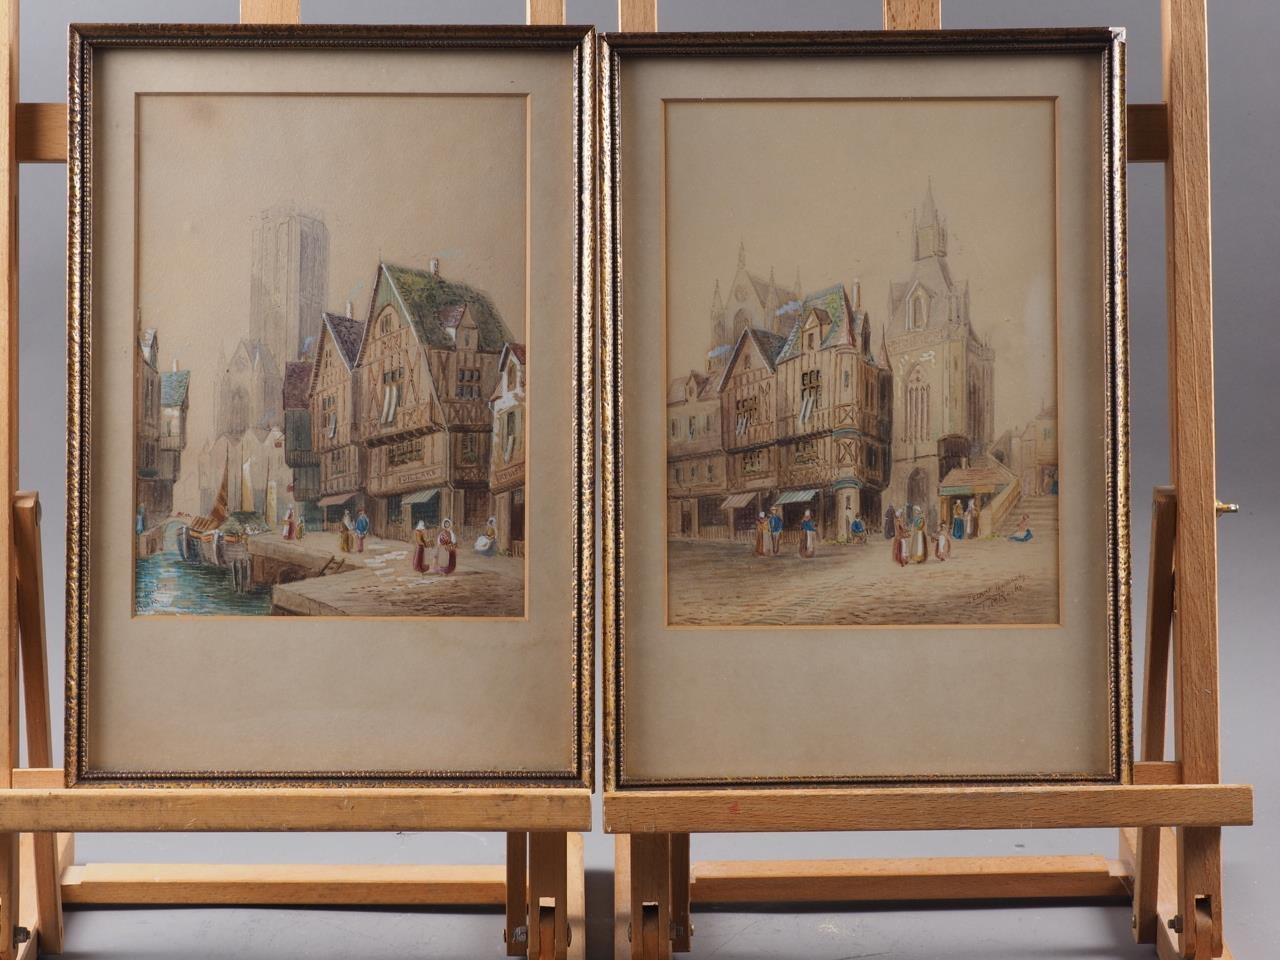 T M Ranke: two watercolour views of "Felmap - Normandy" and "... Britany", 10" x 7 1/2", in gilt